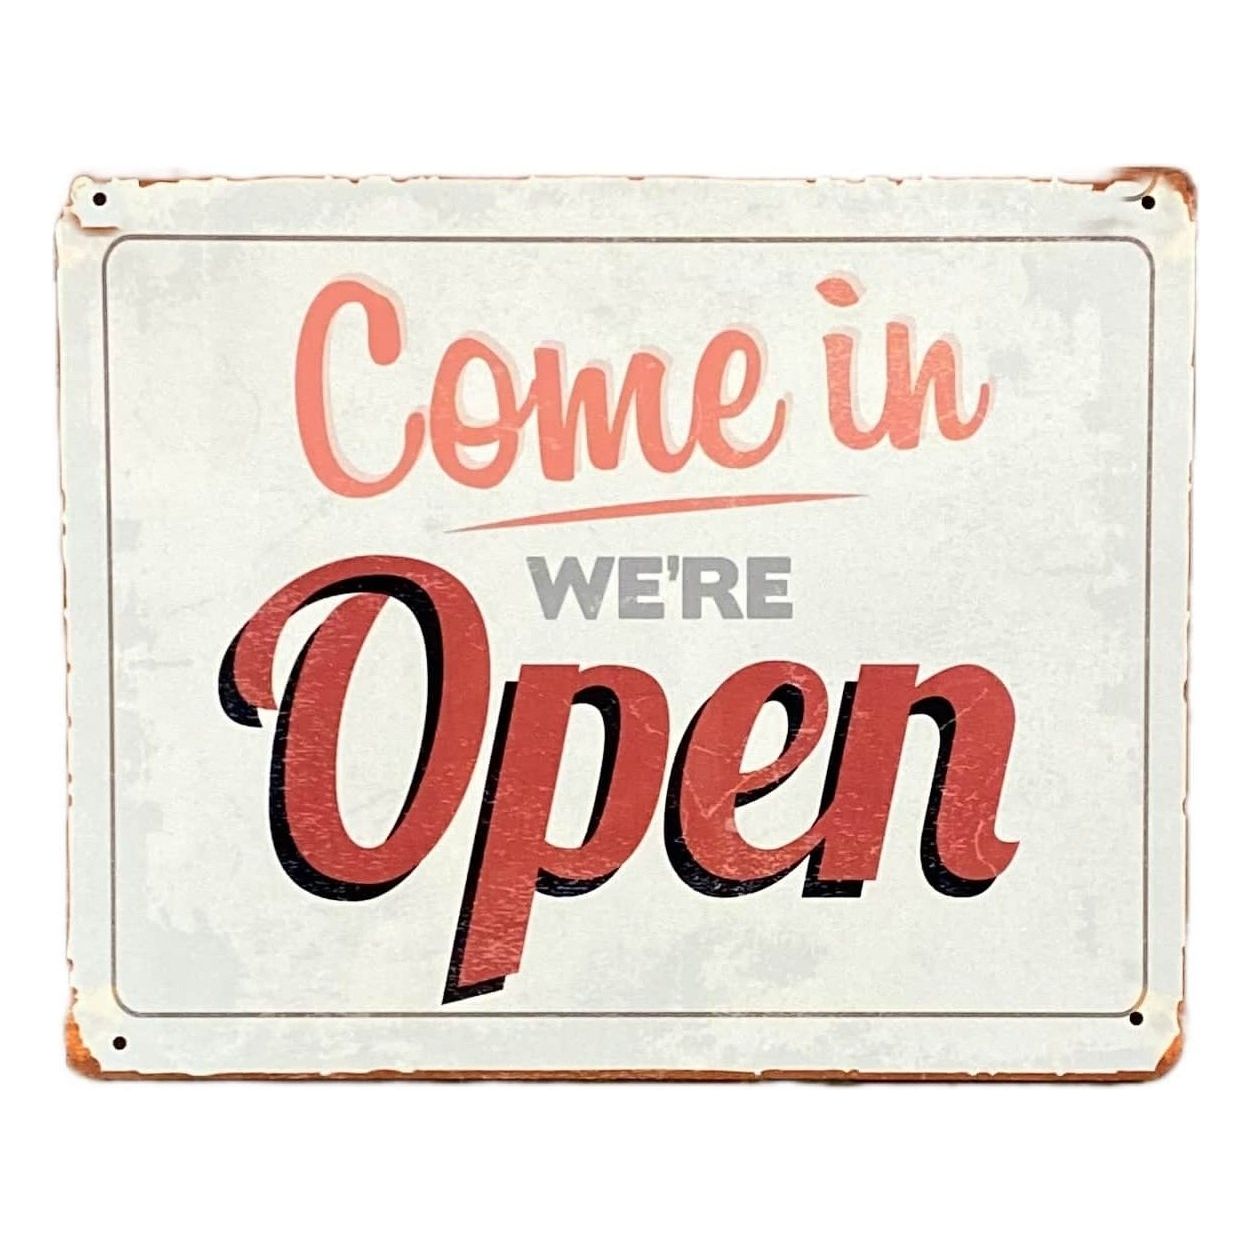 Metal Vintage Wall Sign - Come On In We're Open - Ashton and Finch